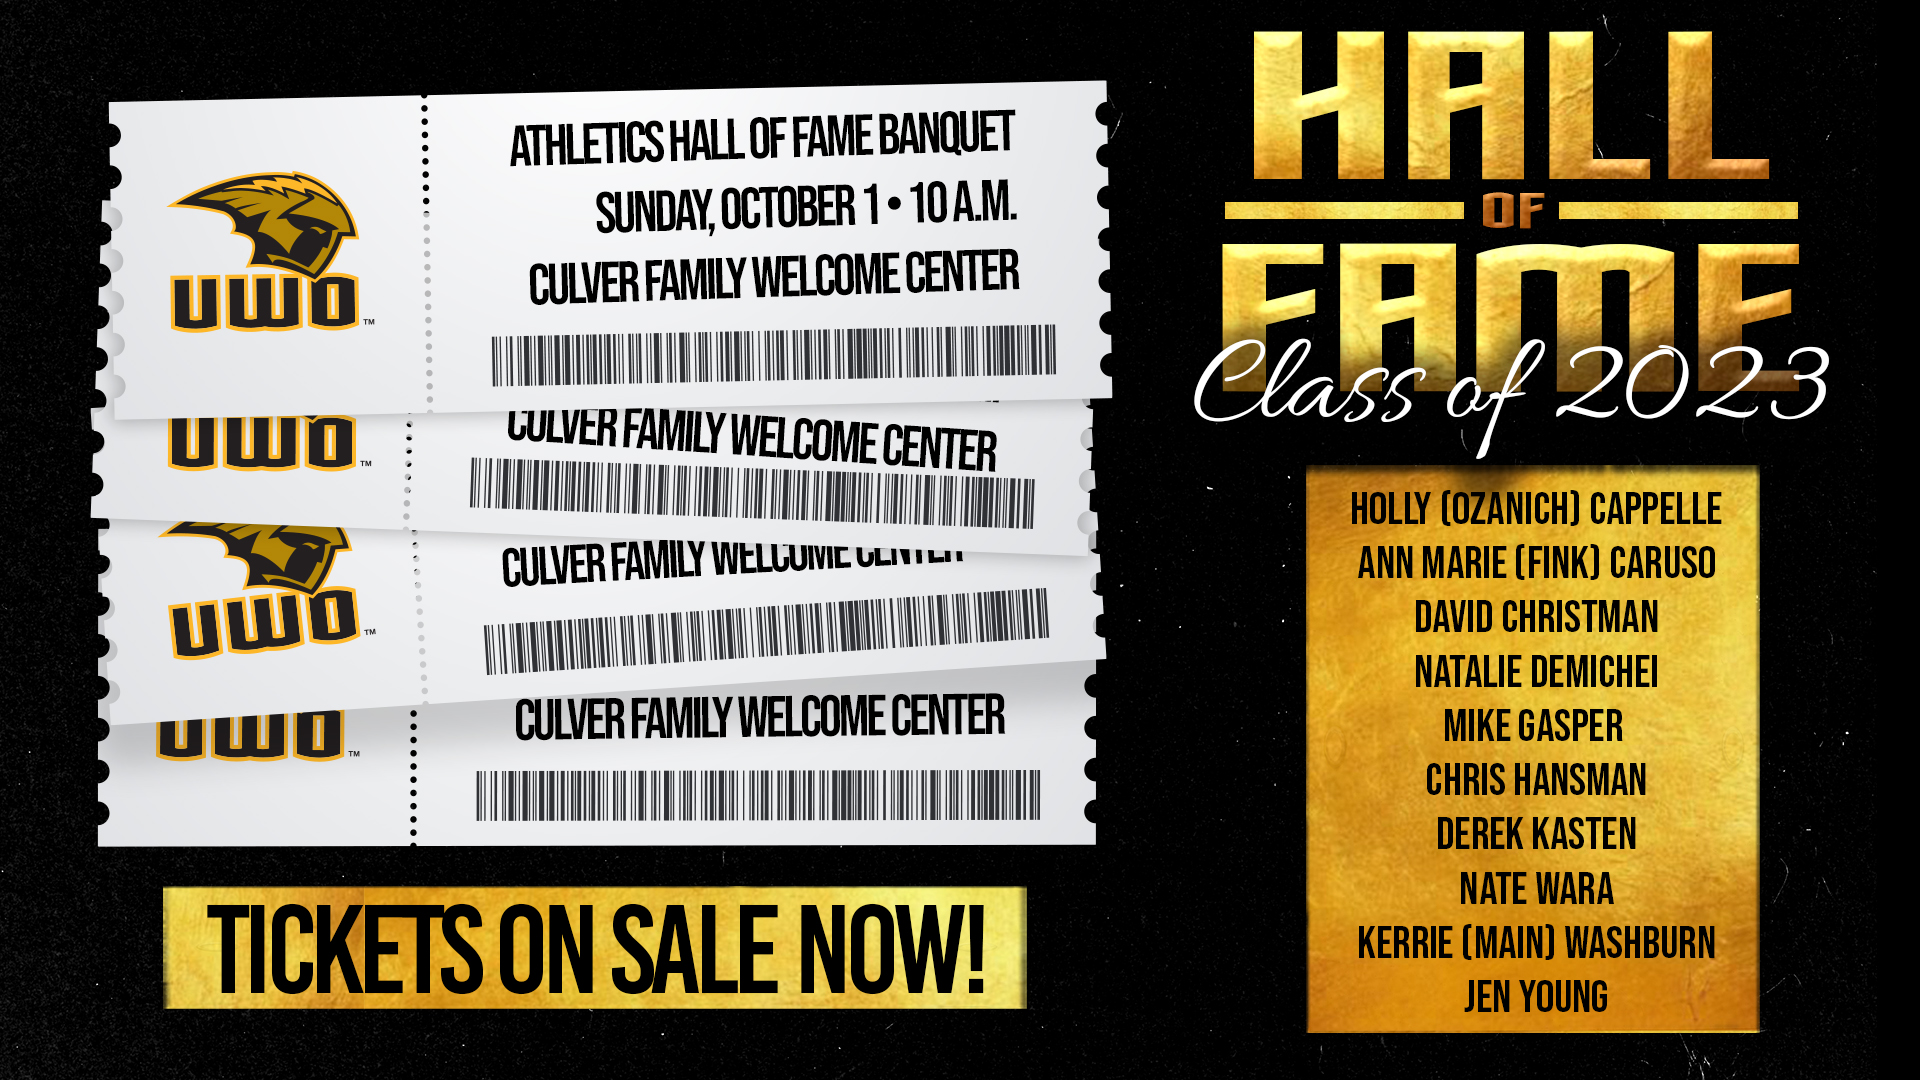 Tickets On Sale For Hall Of Fame Banquet